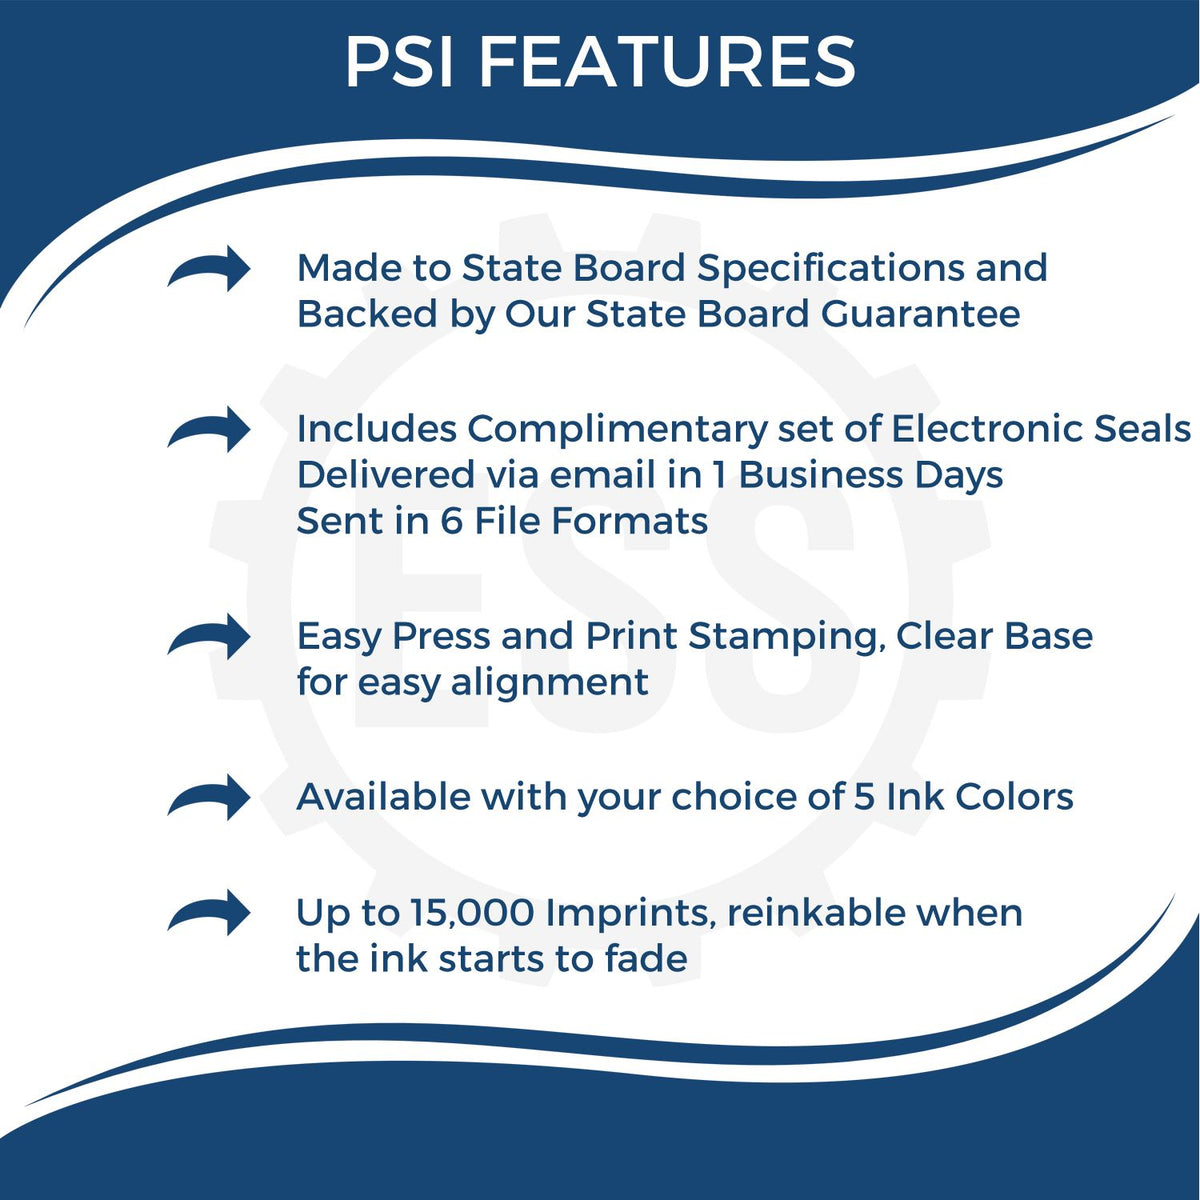 A picture of an infographic highlighting the selling points for the PSI Georgia Notary Stamp